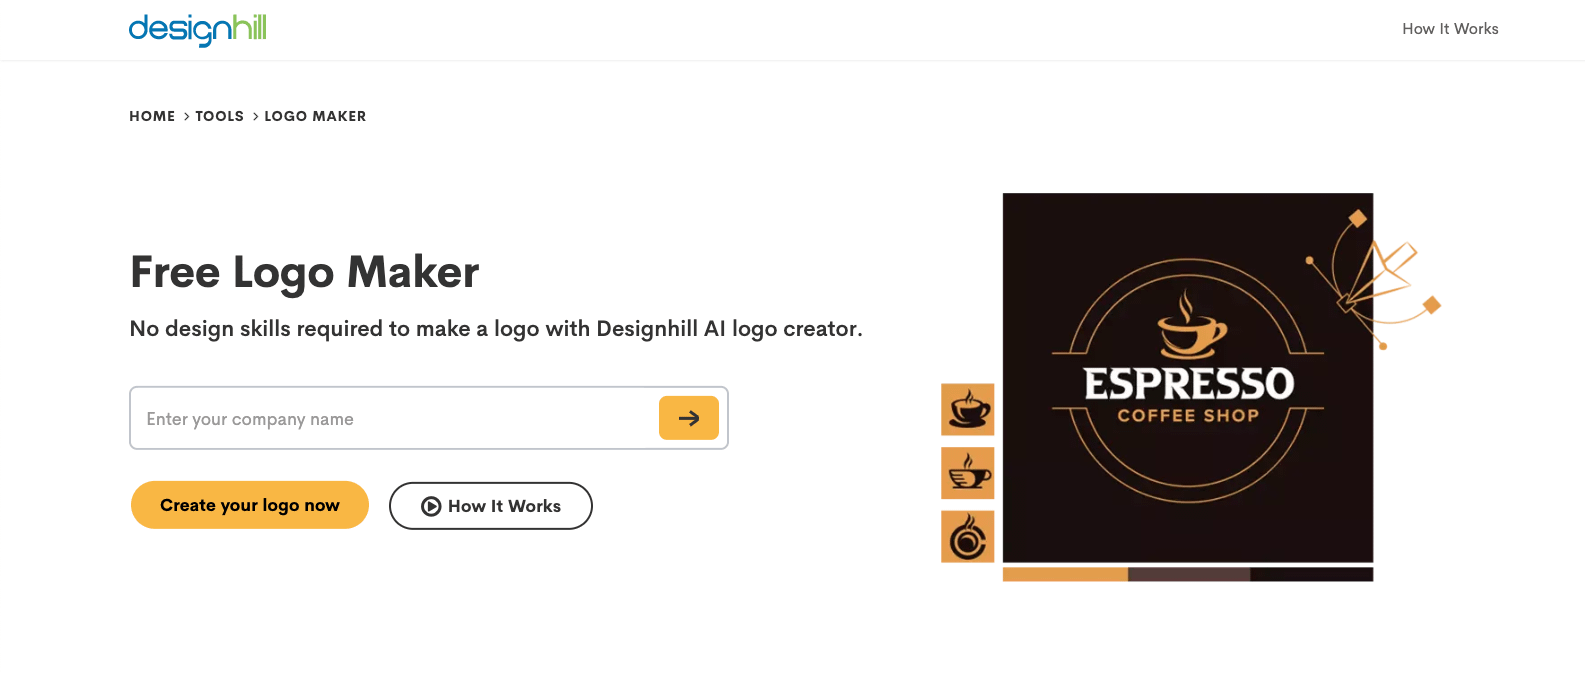 DesignHill is one of the best logo maker options on the web.